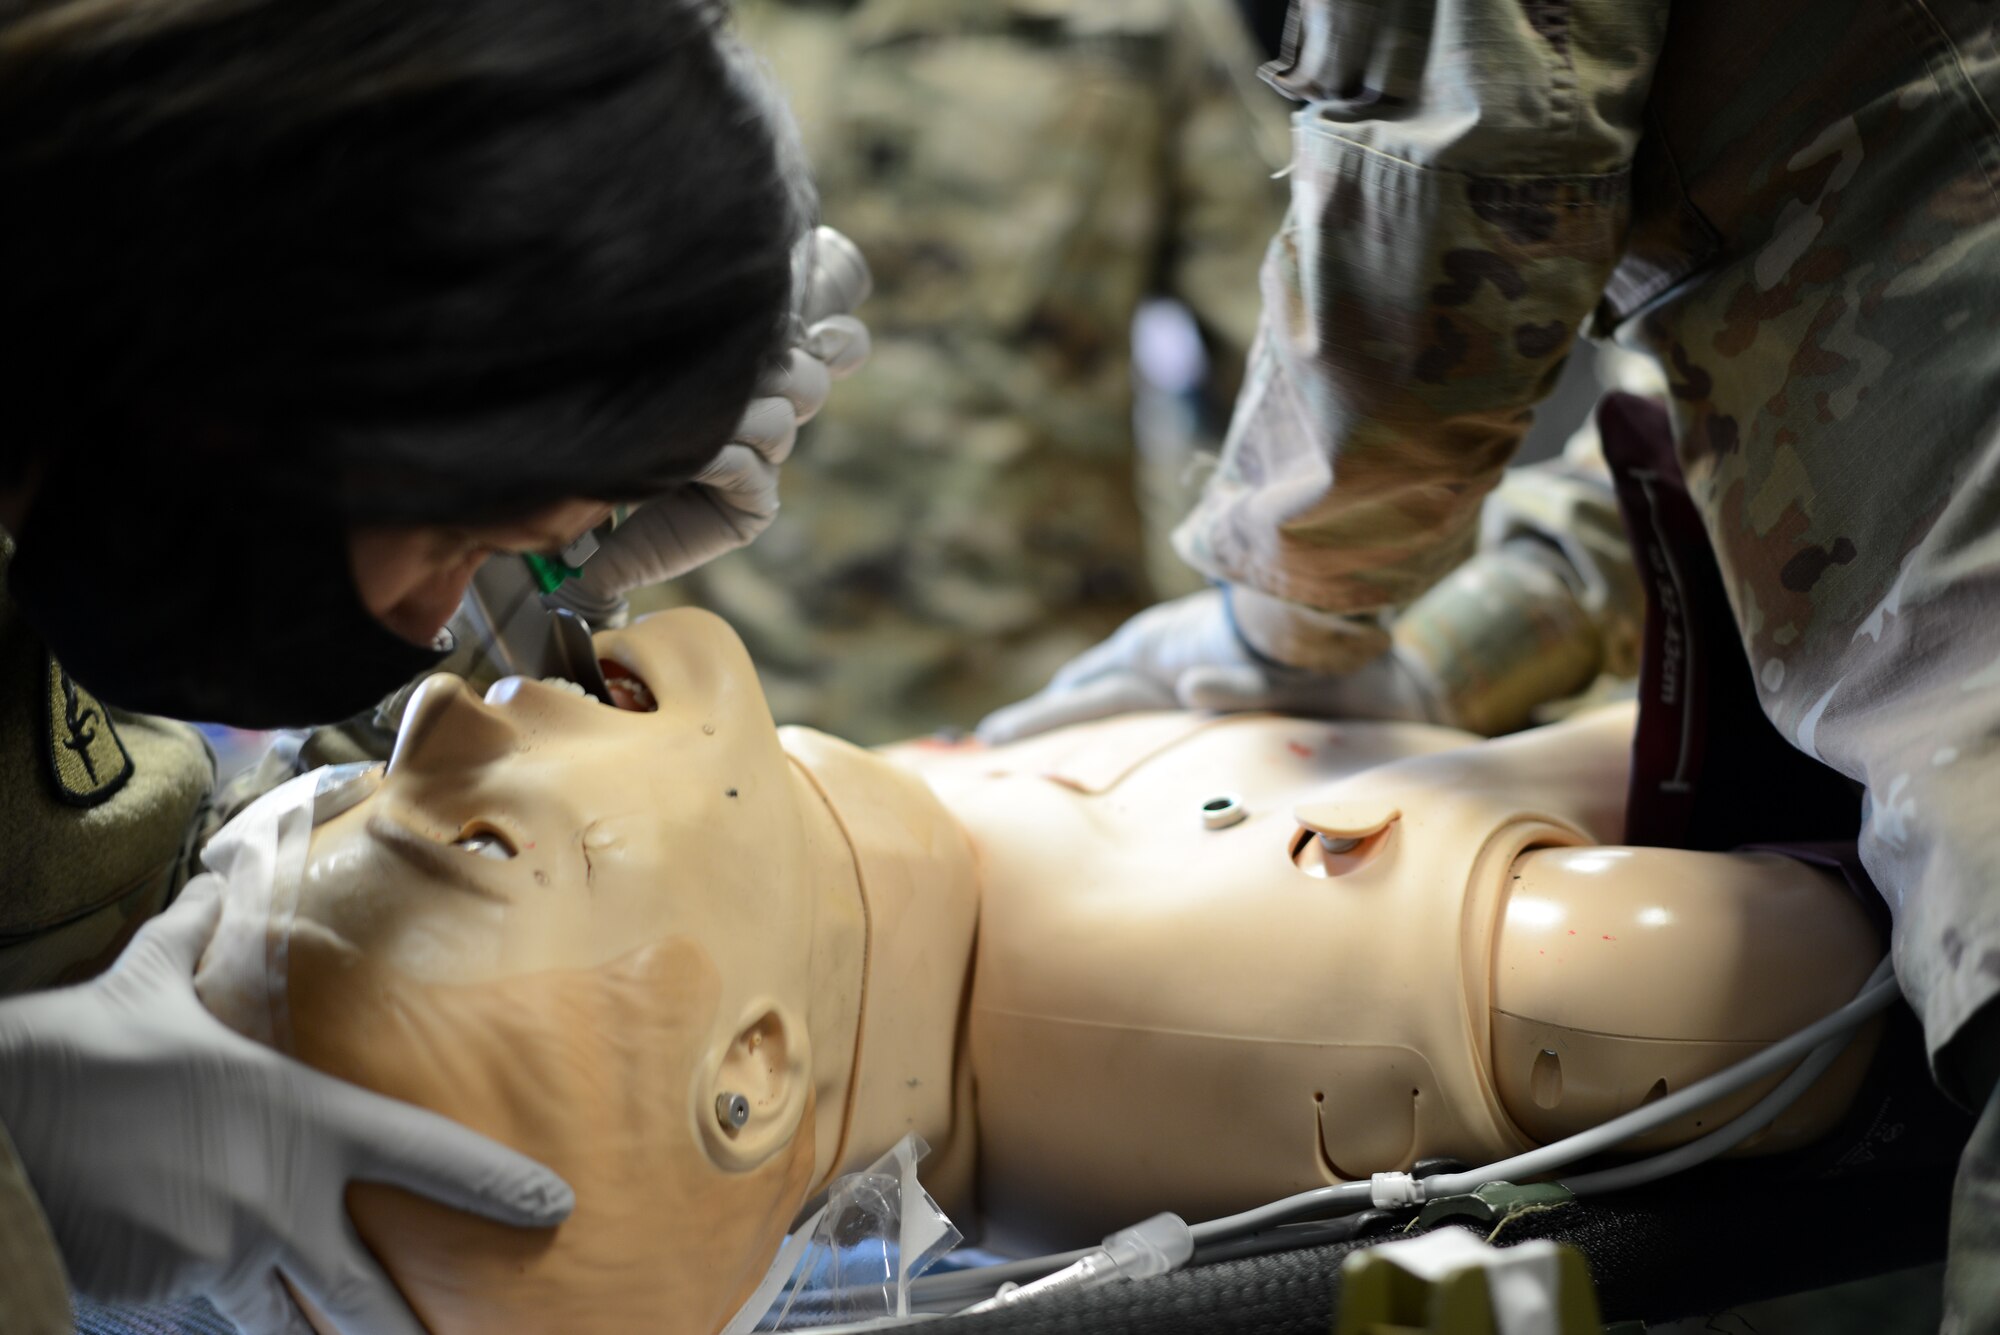 U.S. Army Capt. Jennifer Hensel, 67th Forward Resuscitative Surgical Team Nurse Anesthetist, intubates a patient during a training scenario at the Medical Simulation Training Center, Ramstein Air Base, June 19, 2020.